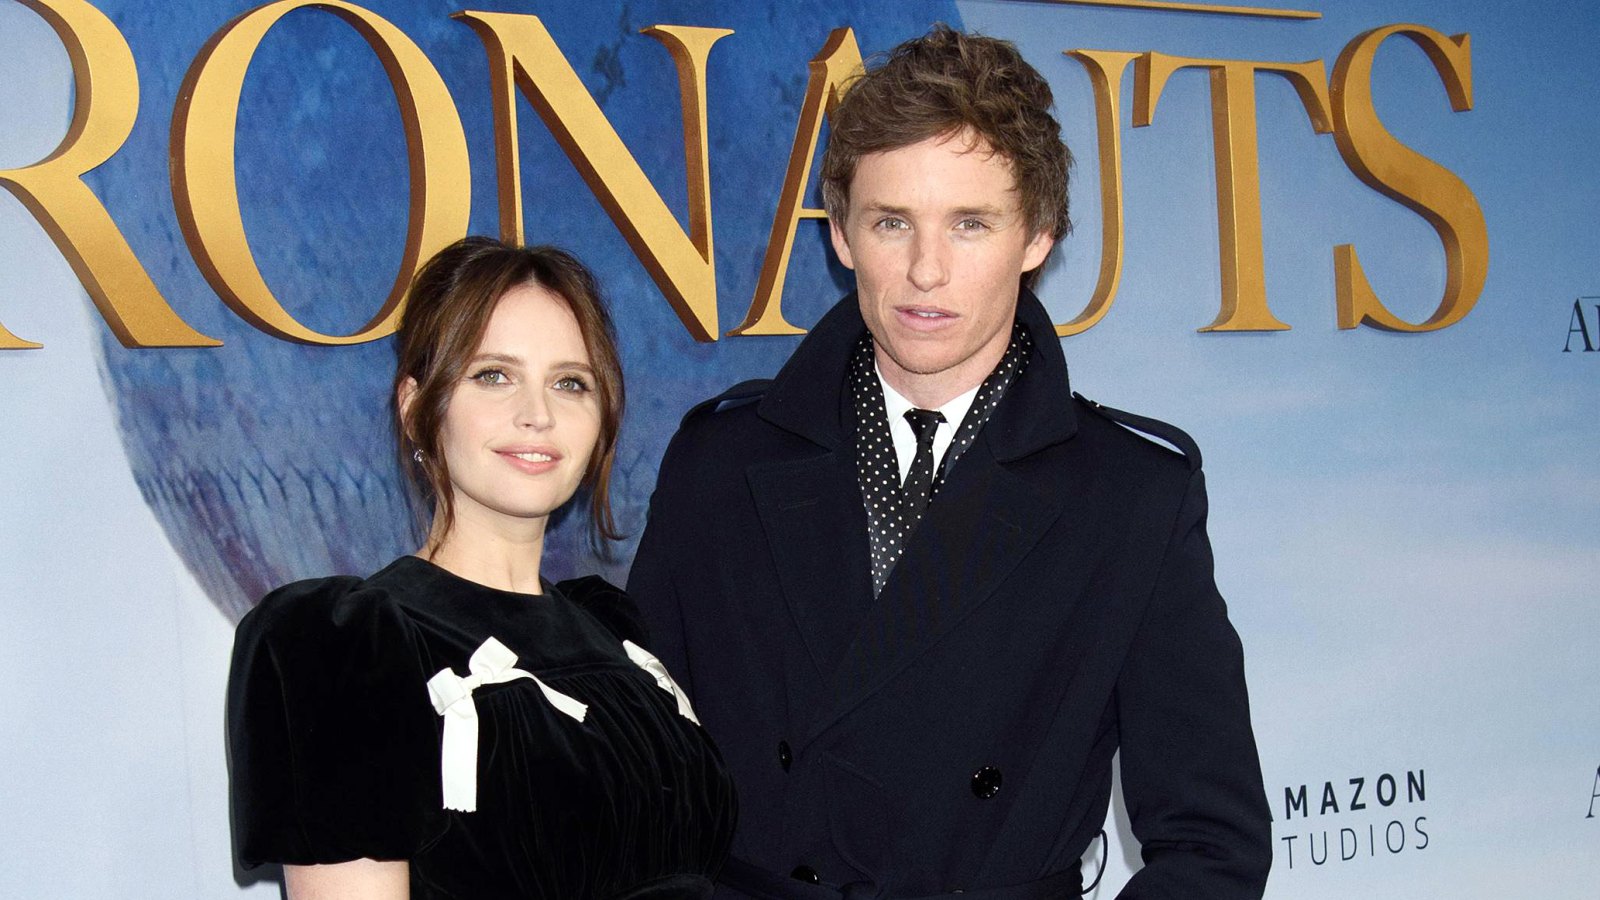 Eddie Redmayne and Pregnant Felicity Jones Go on Double Dates With Spouses